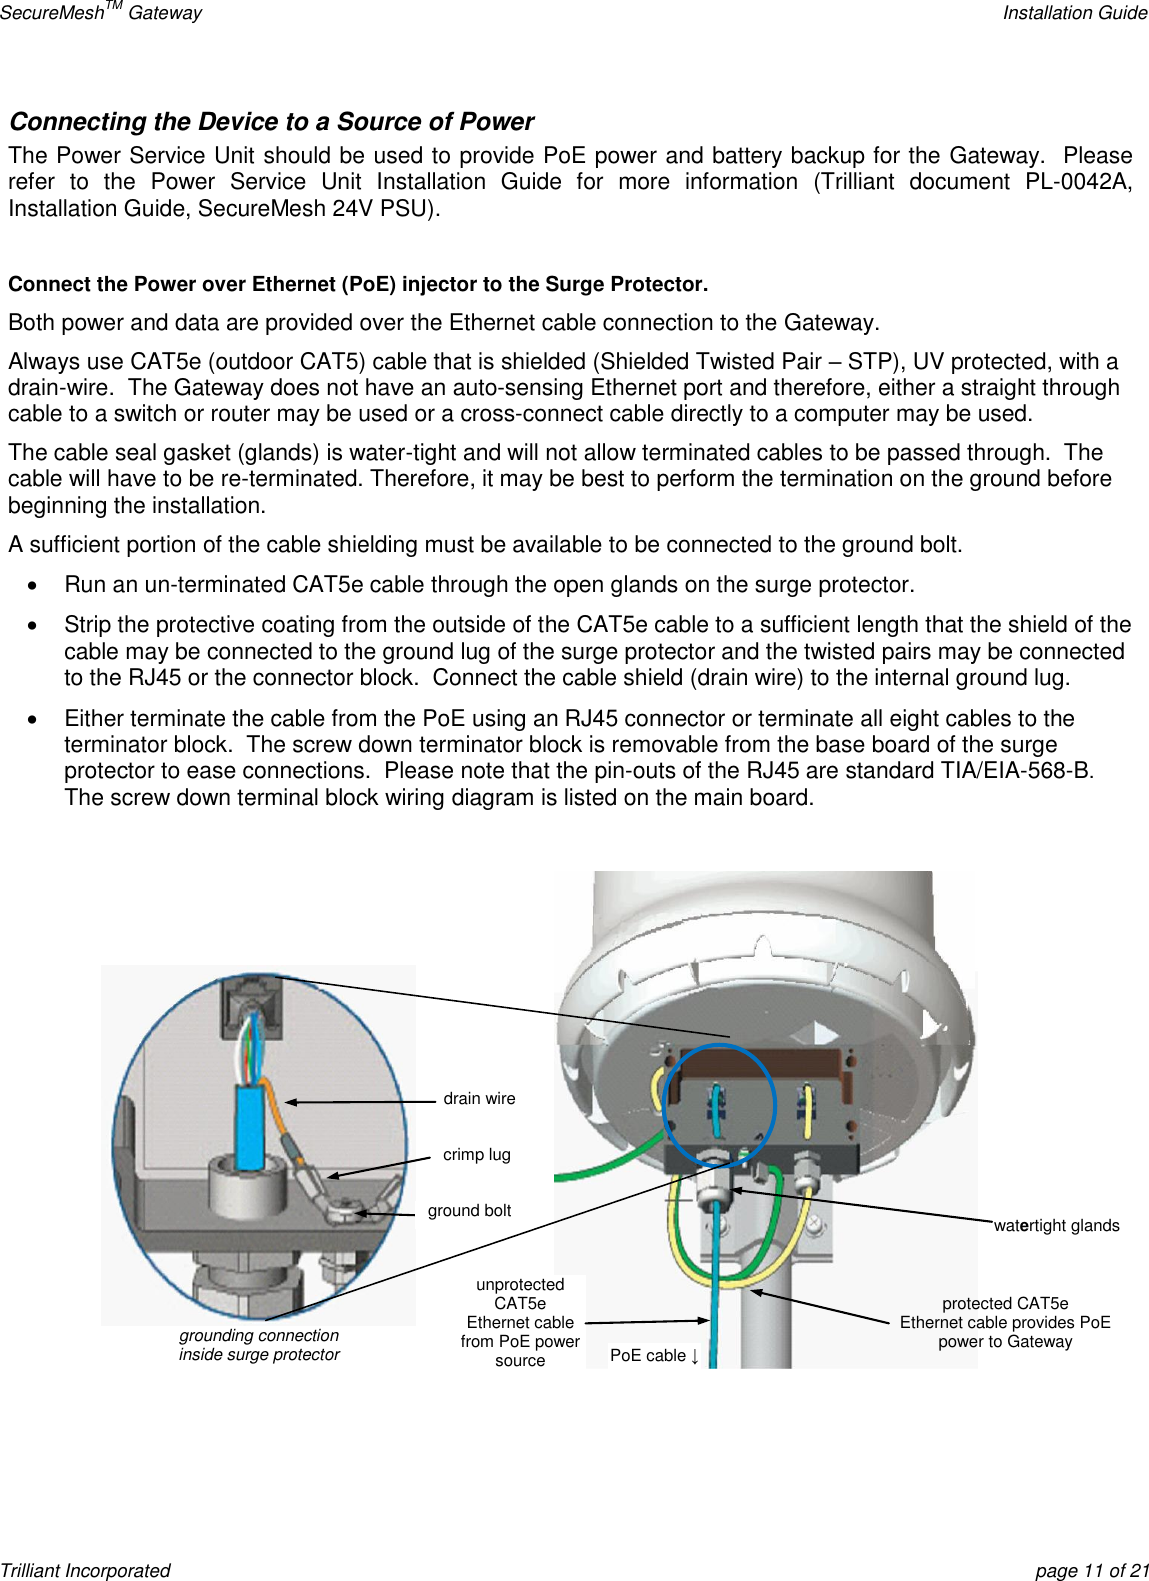 SecureMeshTM Gateway    Installation Guide Trilliant Incorporated  page 11 of 21 Connecting the Device to a Source of Power The Power Service Unit should be used to provide PoE power and battery backup for the Gateway.  Please refer  to  the  Power  Service  Unit  Installation  Guide  for  more  information  (Trilliant  document  PL-0042A, Installation Guide, SecureMesh 24V PSU).  Connect the Power over Ethernet (PoE) injector to the Surge Protector. Both power and data are provided over the Ethernet cable connection to the Gateway. Always use CAT5e (outdoor CAT5) cable that is shielded (Shielded Twisted Pair – STP), UV protected, with a drain-wire.  The Gateway does not have an auto-sensing Ethernet port and therefore, either a straight through cable to a switch or router may be used or a cross-connect cable directly to a computer may be used. The cable seal gasket (glands) is water-tight and will not allow terminated cables to be passed through.  The cable will have to be re-terminated. Therefore, it may be best to perform the termination on the ground before beginning the installation. A sufficient portion of the cable shielding must be available to be connected to the ground bolt.   Run an un-terminated CAT5e cable through the open glands on the surge protector.   Strip the protective coating from the outside of the CAT5e cable to a sufficient length that the shield of the cable may be connected to the ground lug of the surge protector and the twisted pairs may be connected to the RJ45 or the connector block.  Connect the cable shield (drain wire) to the internal ground lug.   Either terminate the cable from the PoE using an RJ45 connector or terminate all eight cables to the terminator block.  The screw down terminator block is removable from the base board of the surge protector to ease connections.  Please note that the pin-outs of the RJ45 are standard TIA/EIA-568-B.  The screw down terminal block wiring diagram is listed on the main board.      drain wire crimp lug grounding connection inside surge protector ground bolt unprotected CAT5e Ethernet cable from PoE power source watertight glands PoE cable ↓ protected CAT5e Ethernet cable provides PoE power to Gateway 